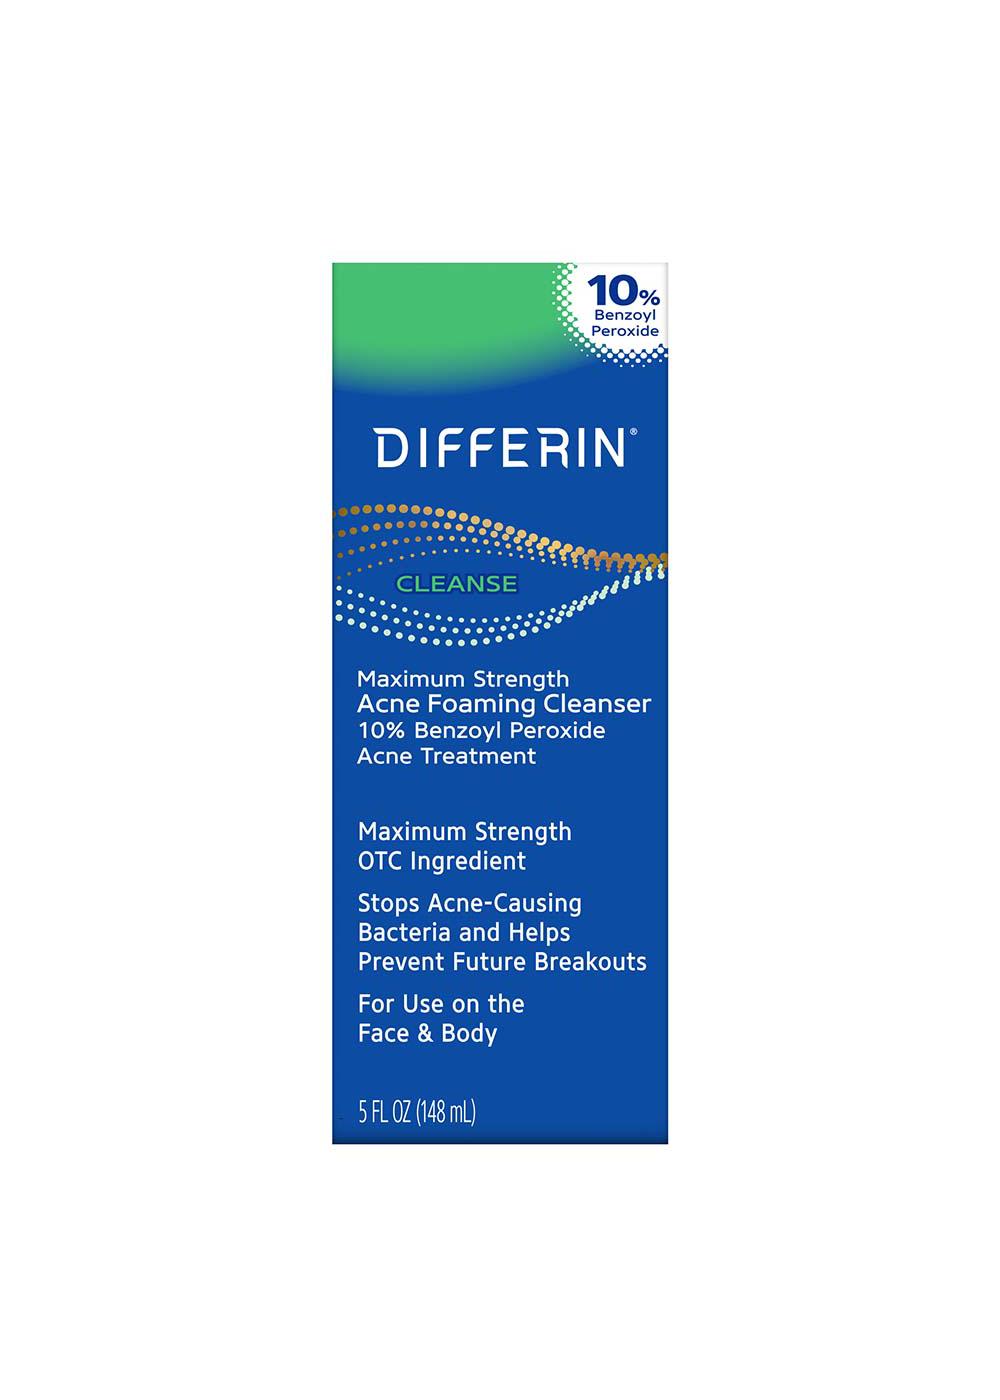 Differin Maximum Strength Acne Foaming Cleanser; image 1 of 11